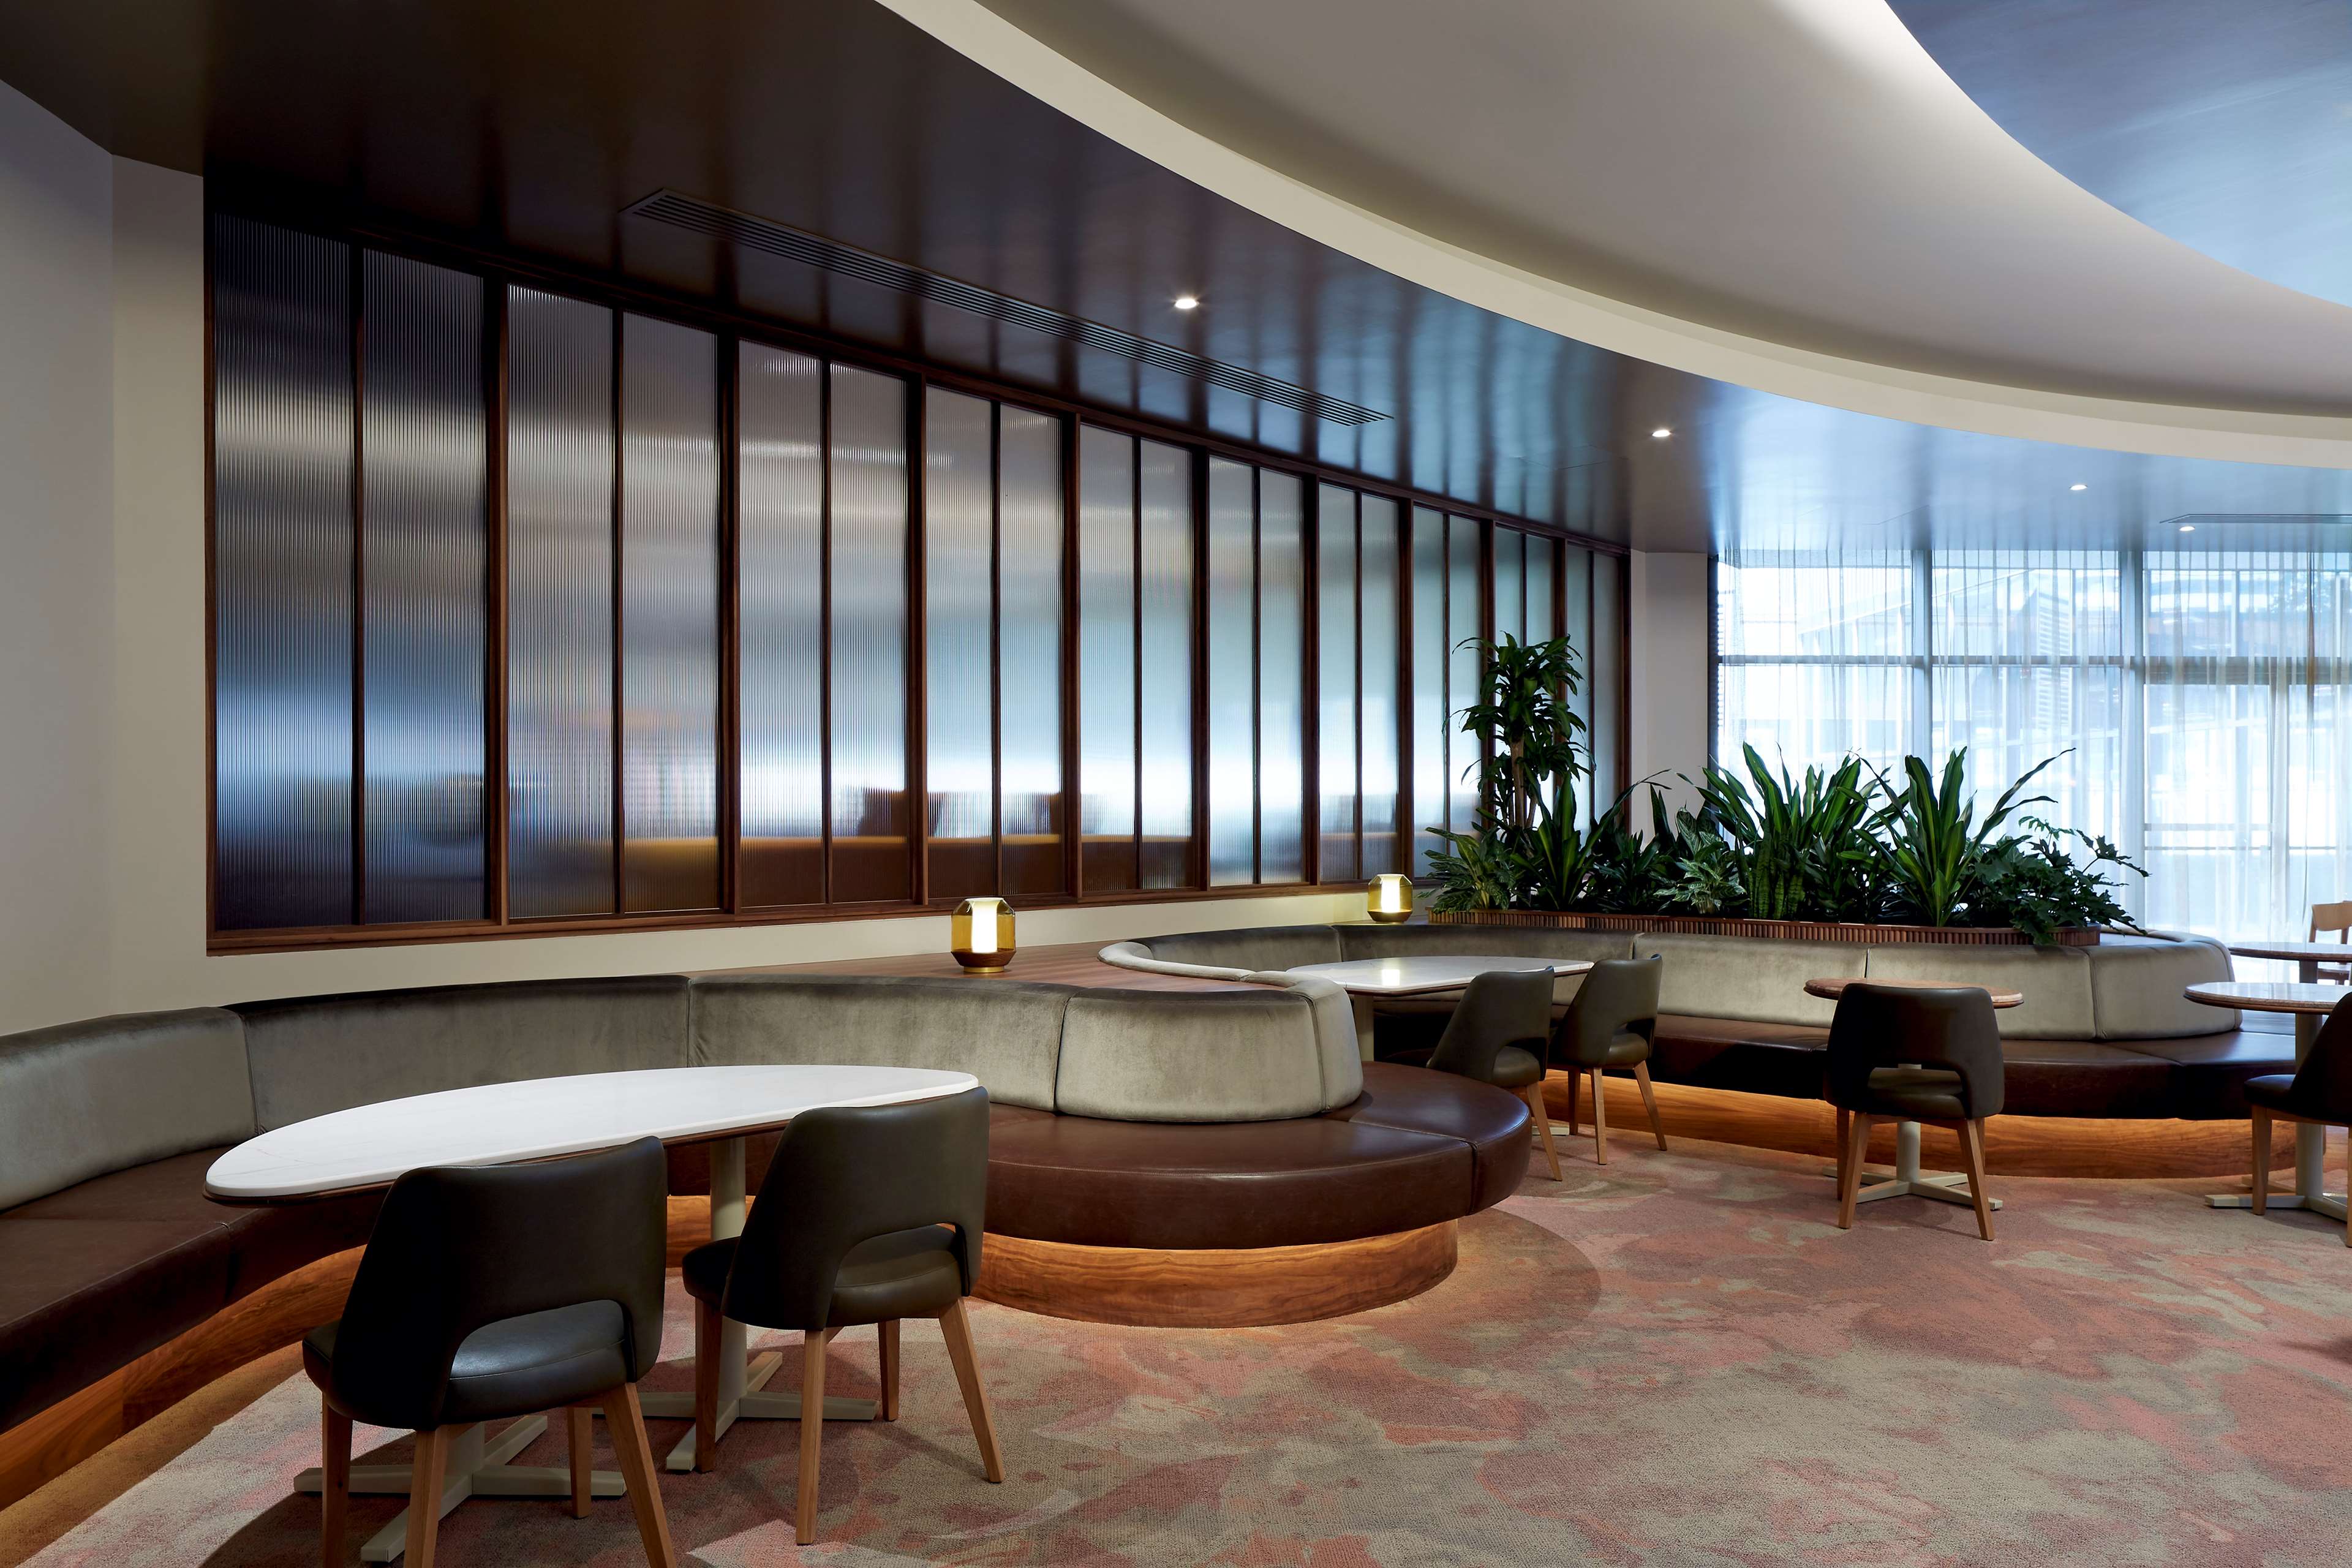 Images DoubleTree by Hilton Montreal